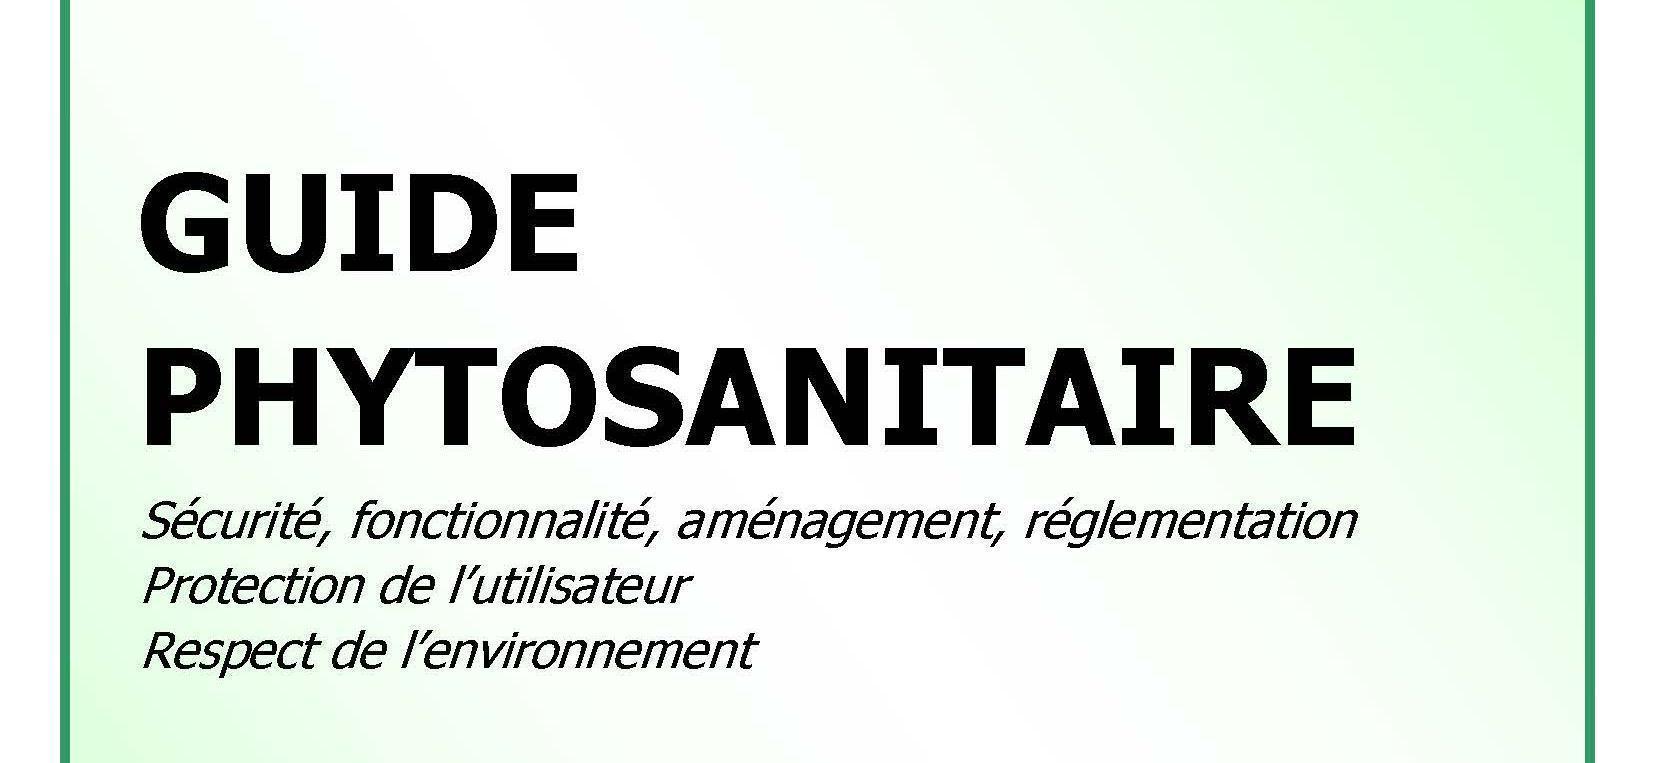 Guide phytosanitaire 2021